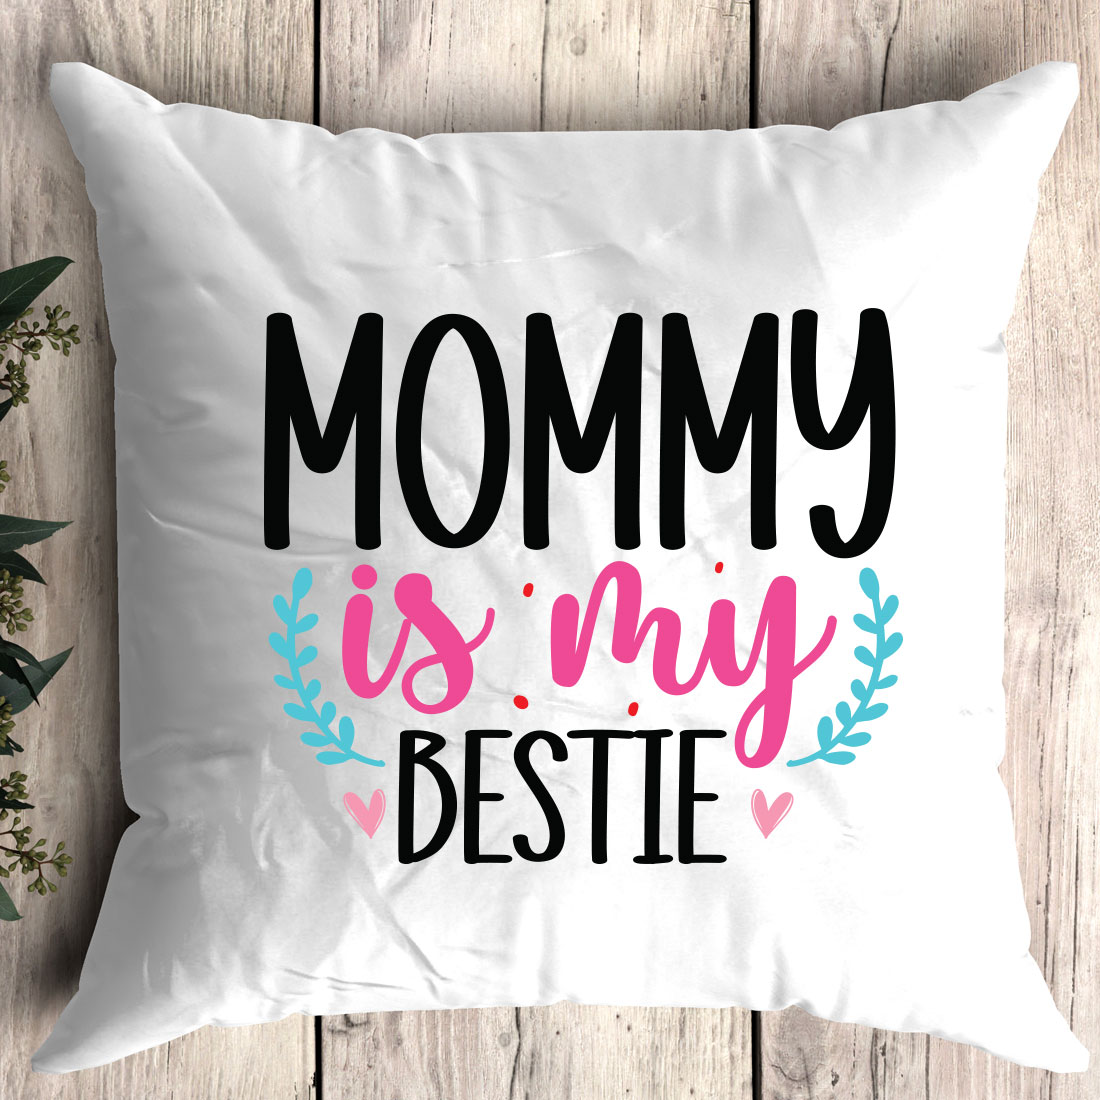 Pillow that says mommy is my bestie.